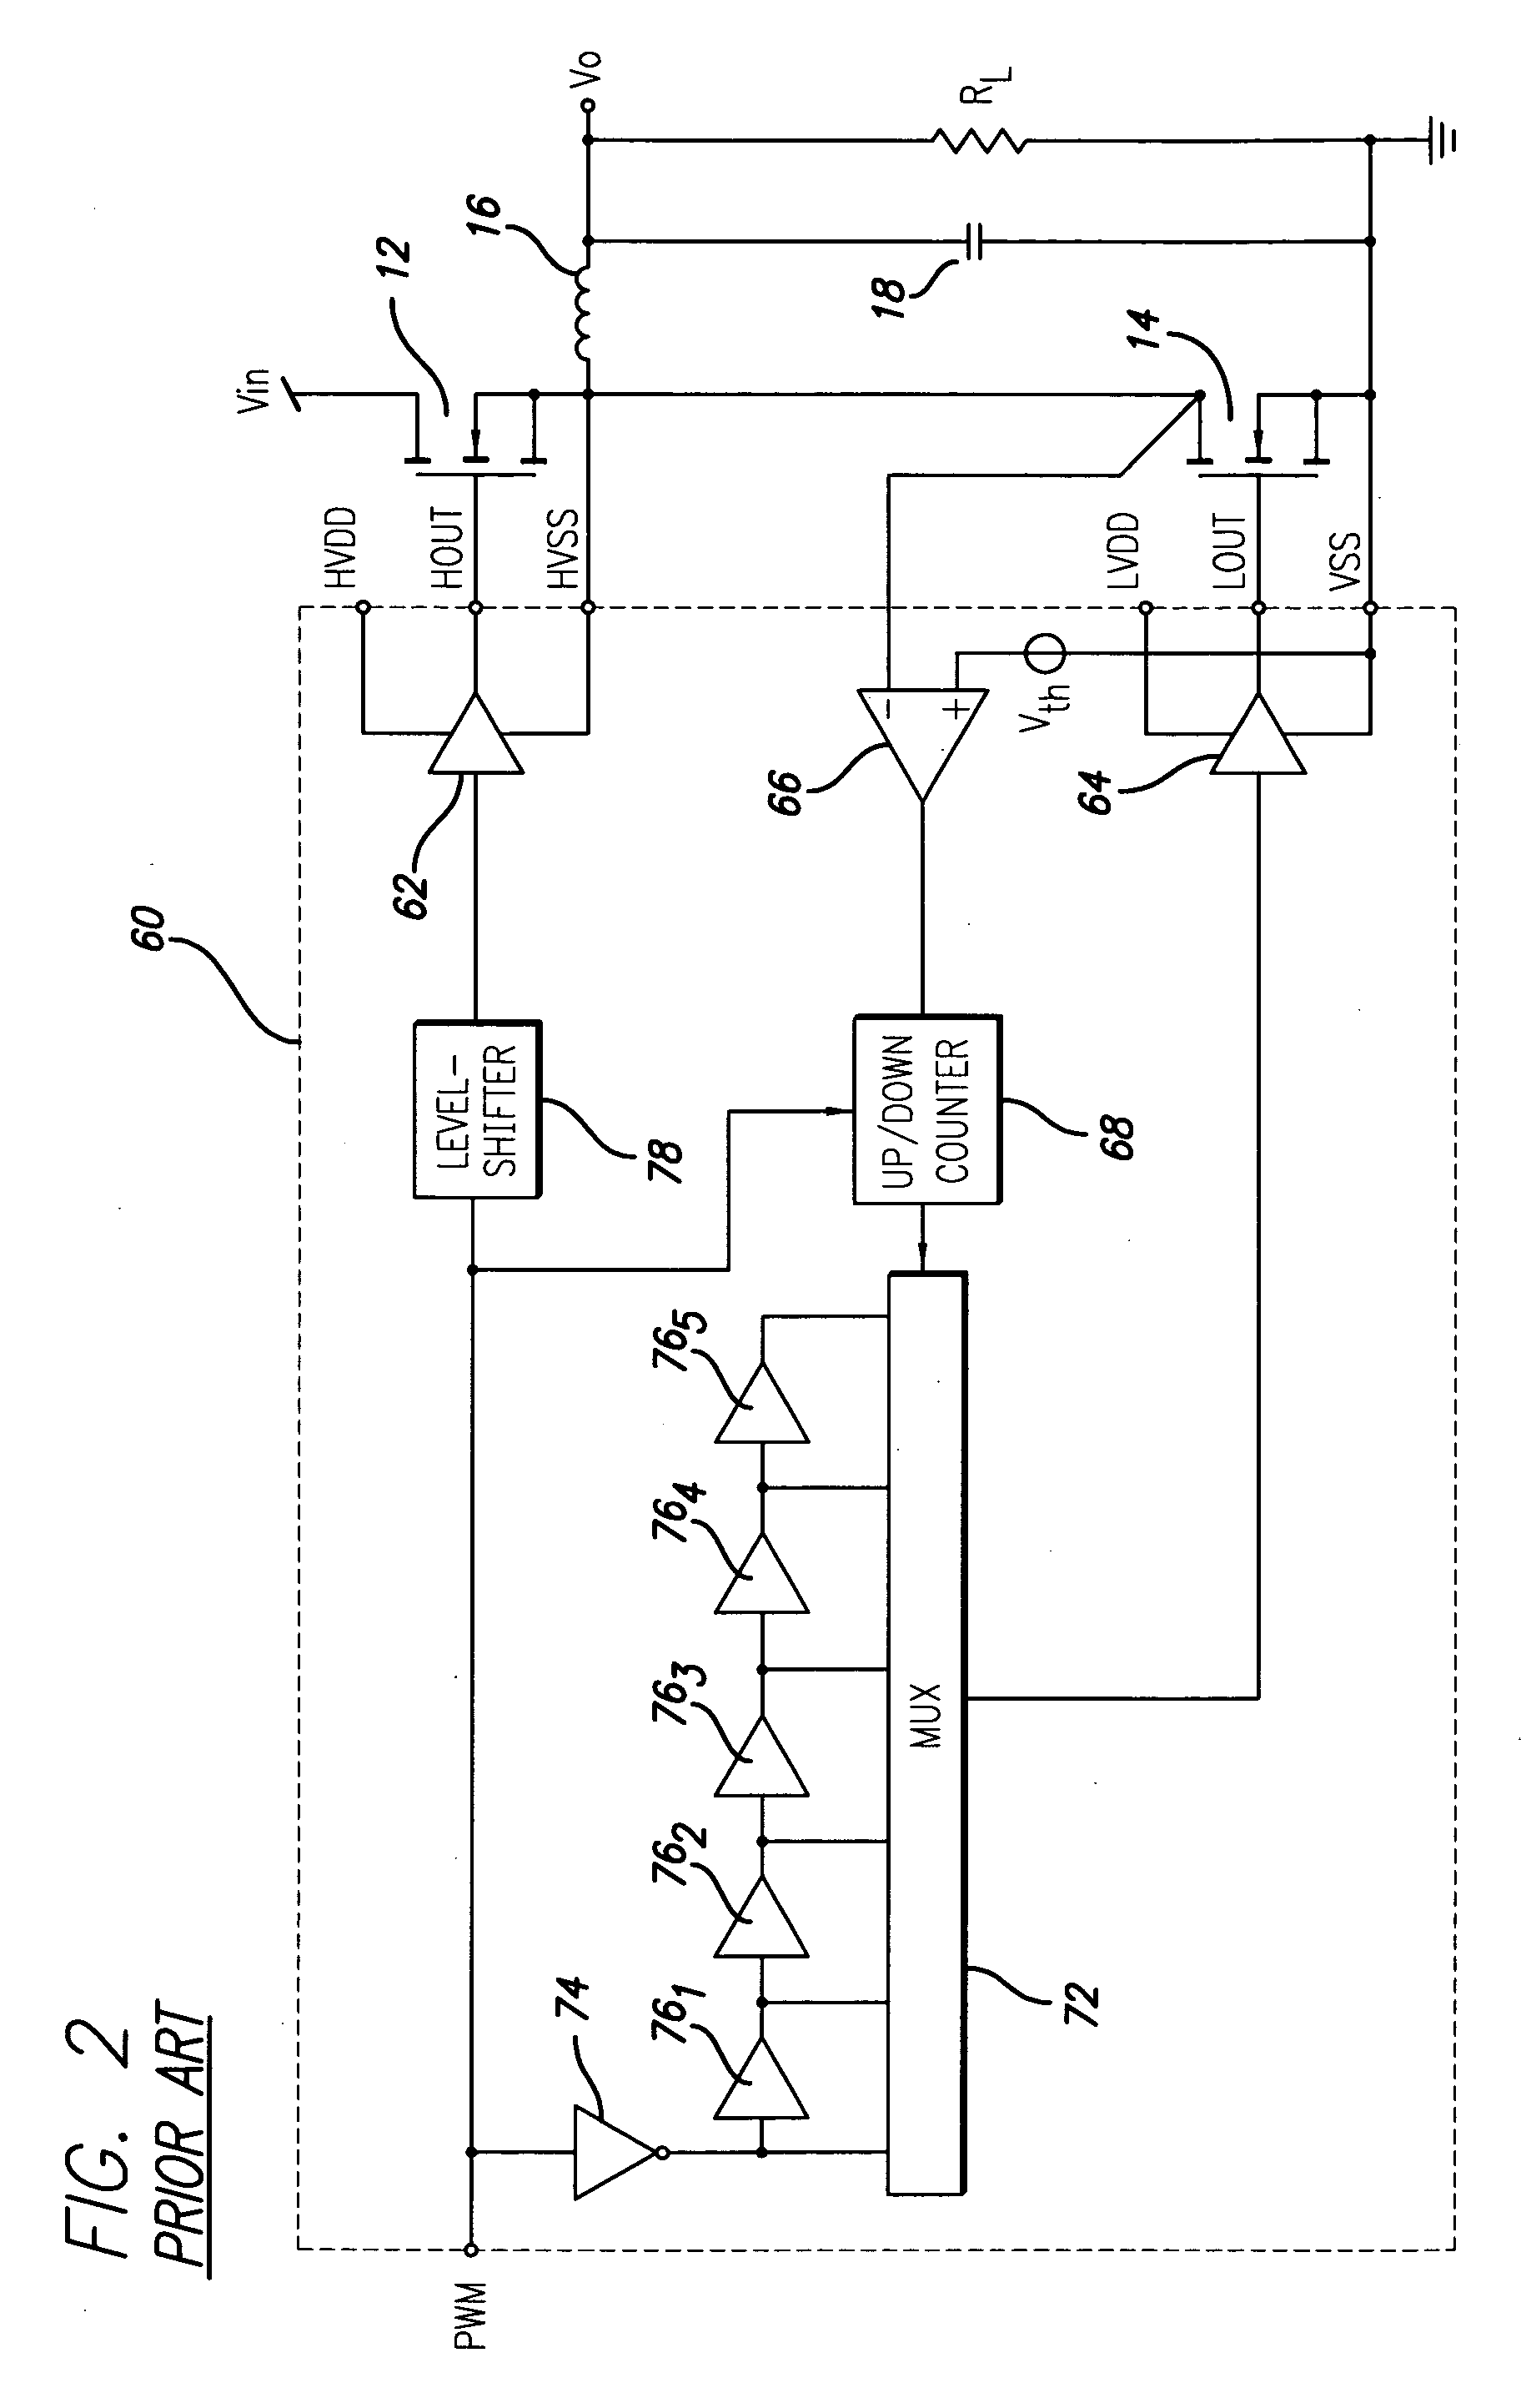 Adaptive delay control circuit for switched mode power supply